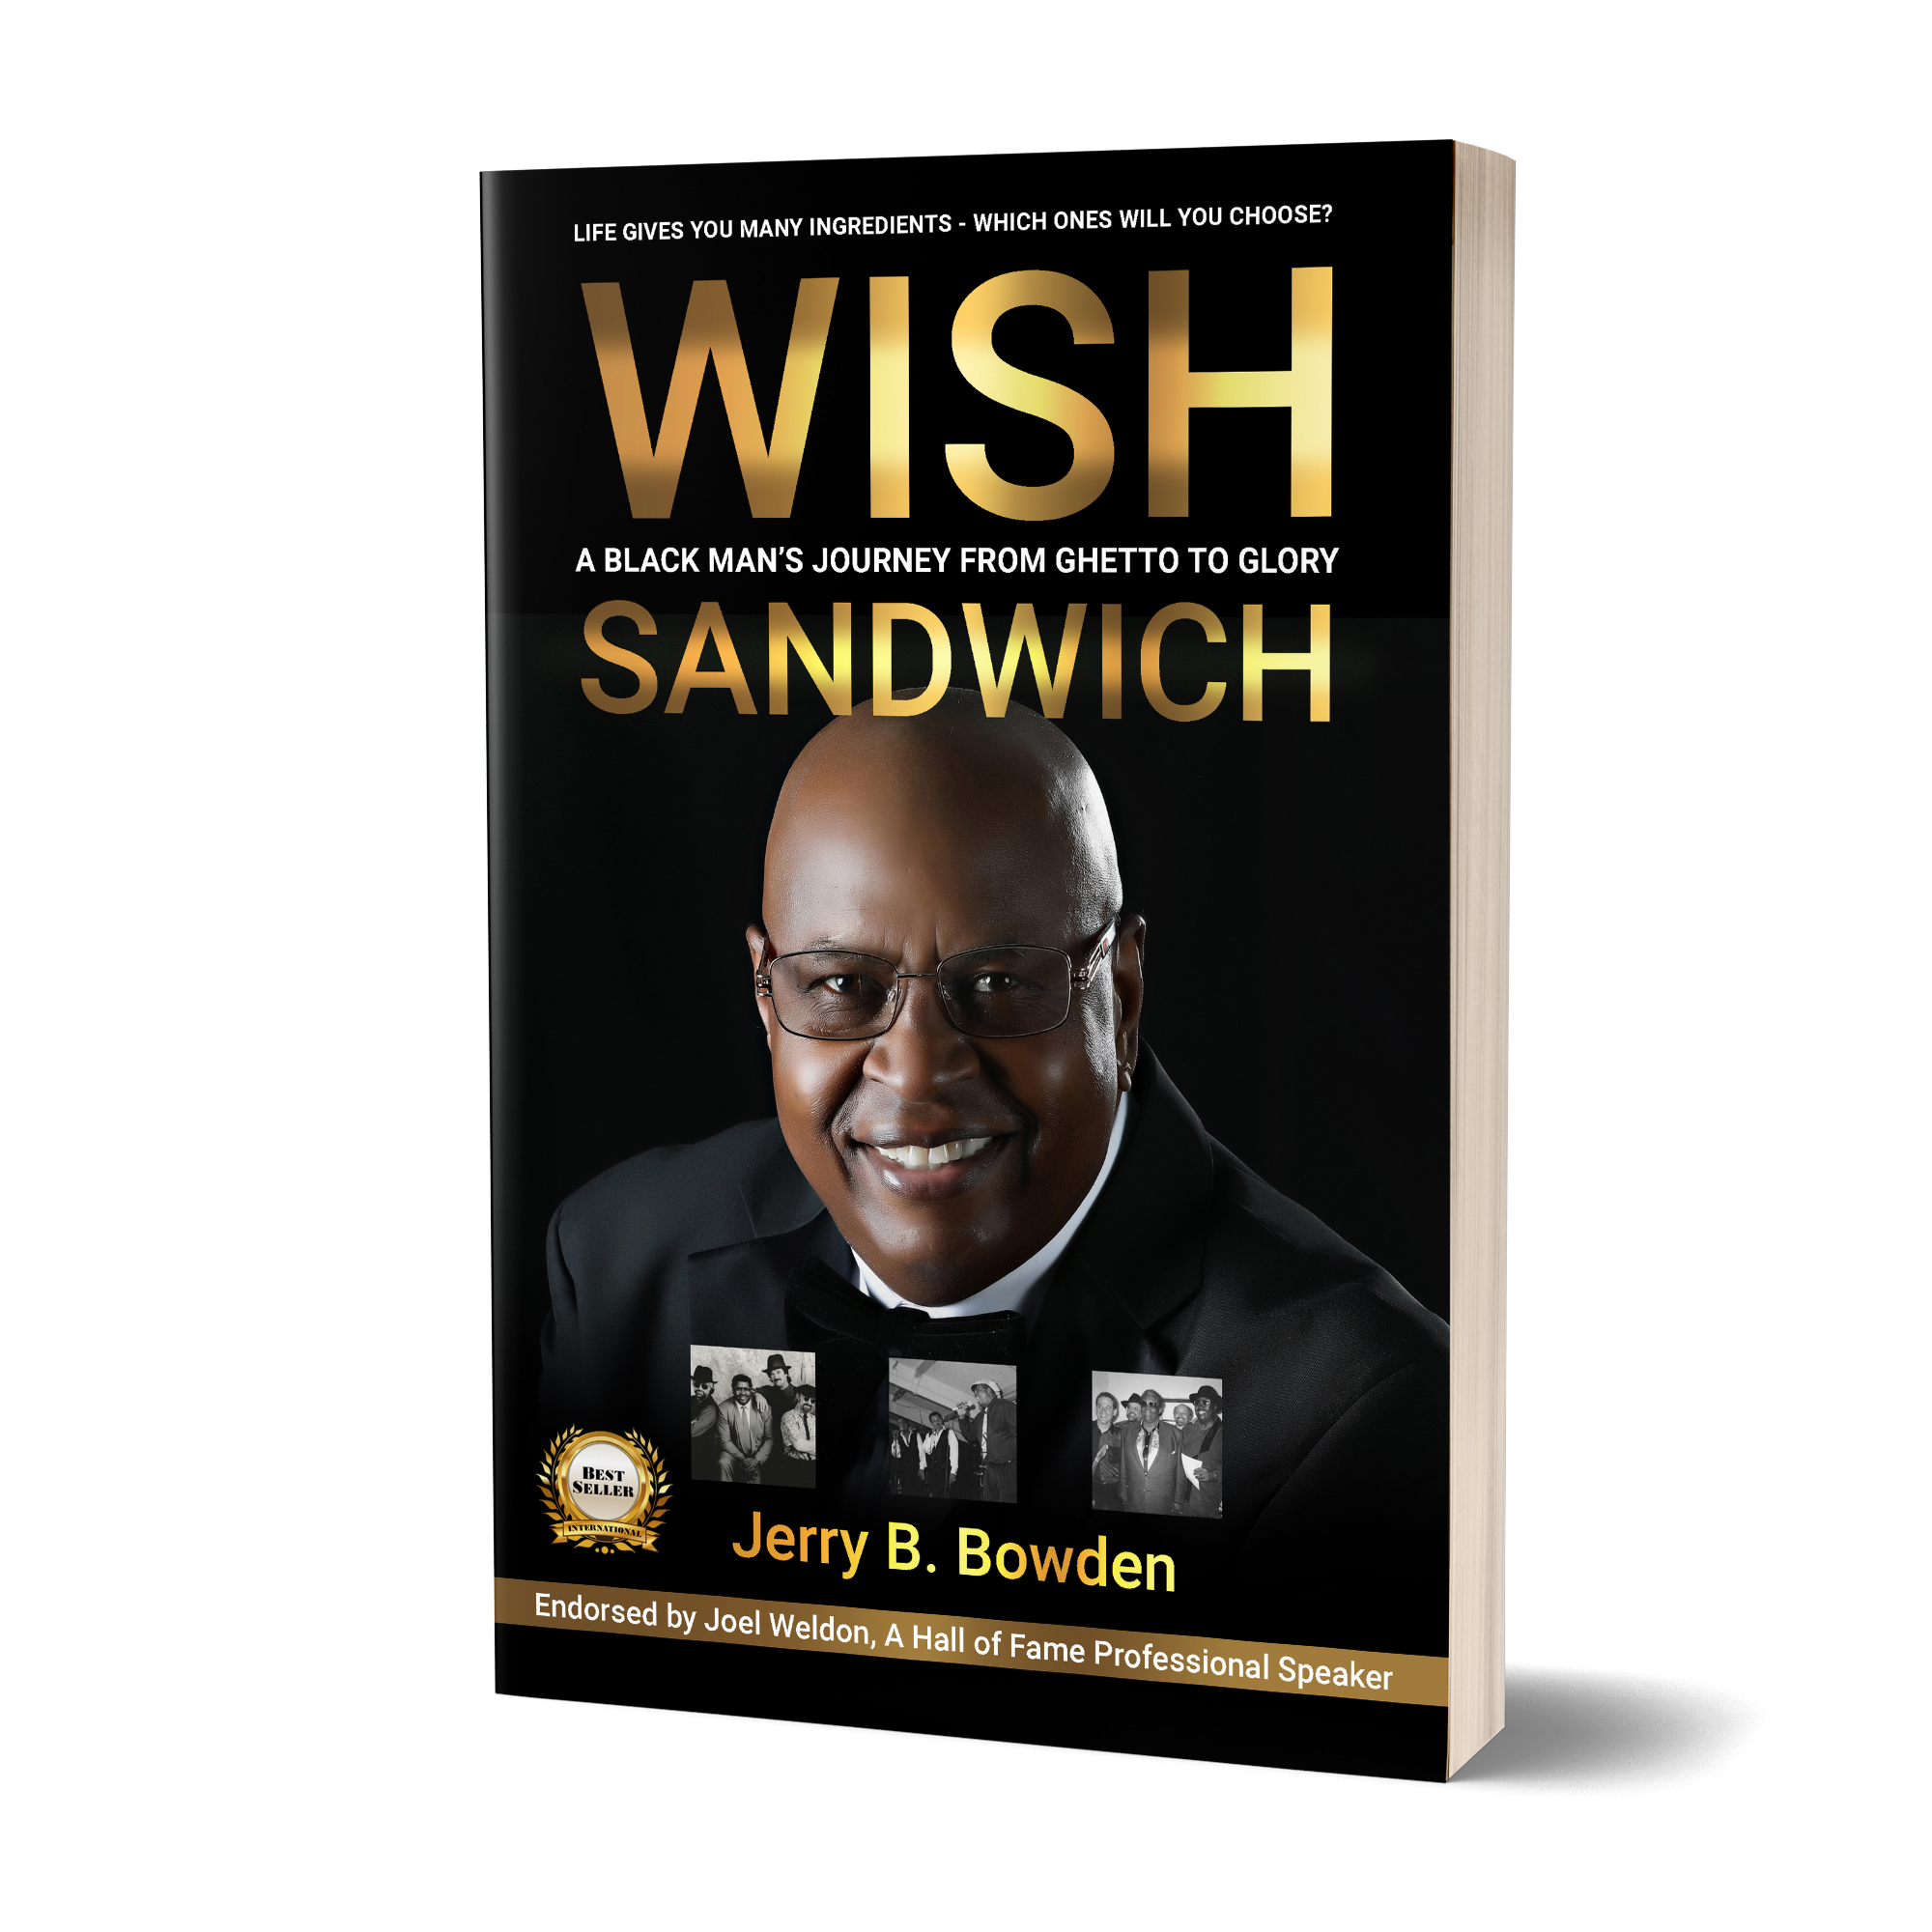 Image of Jerry B. Bowden's book titled, Wish Sandwich, a black man's journey from ghetto to glory